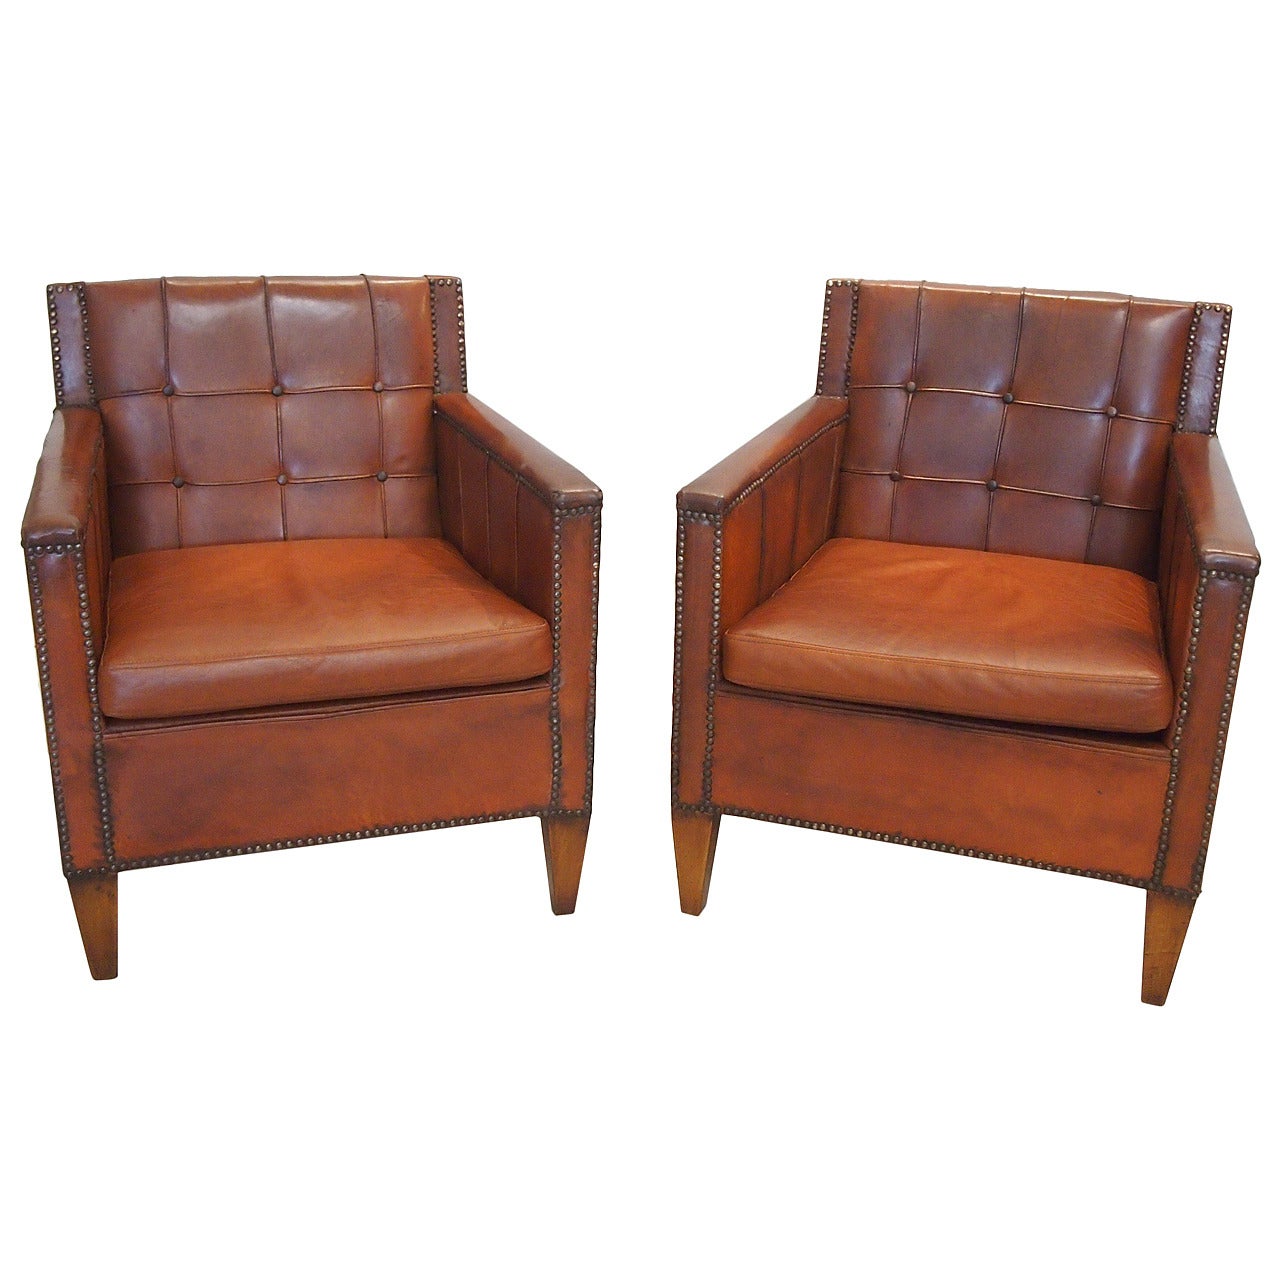 Pair of Leather Library Chairs